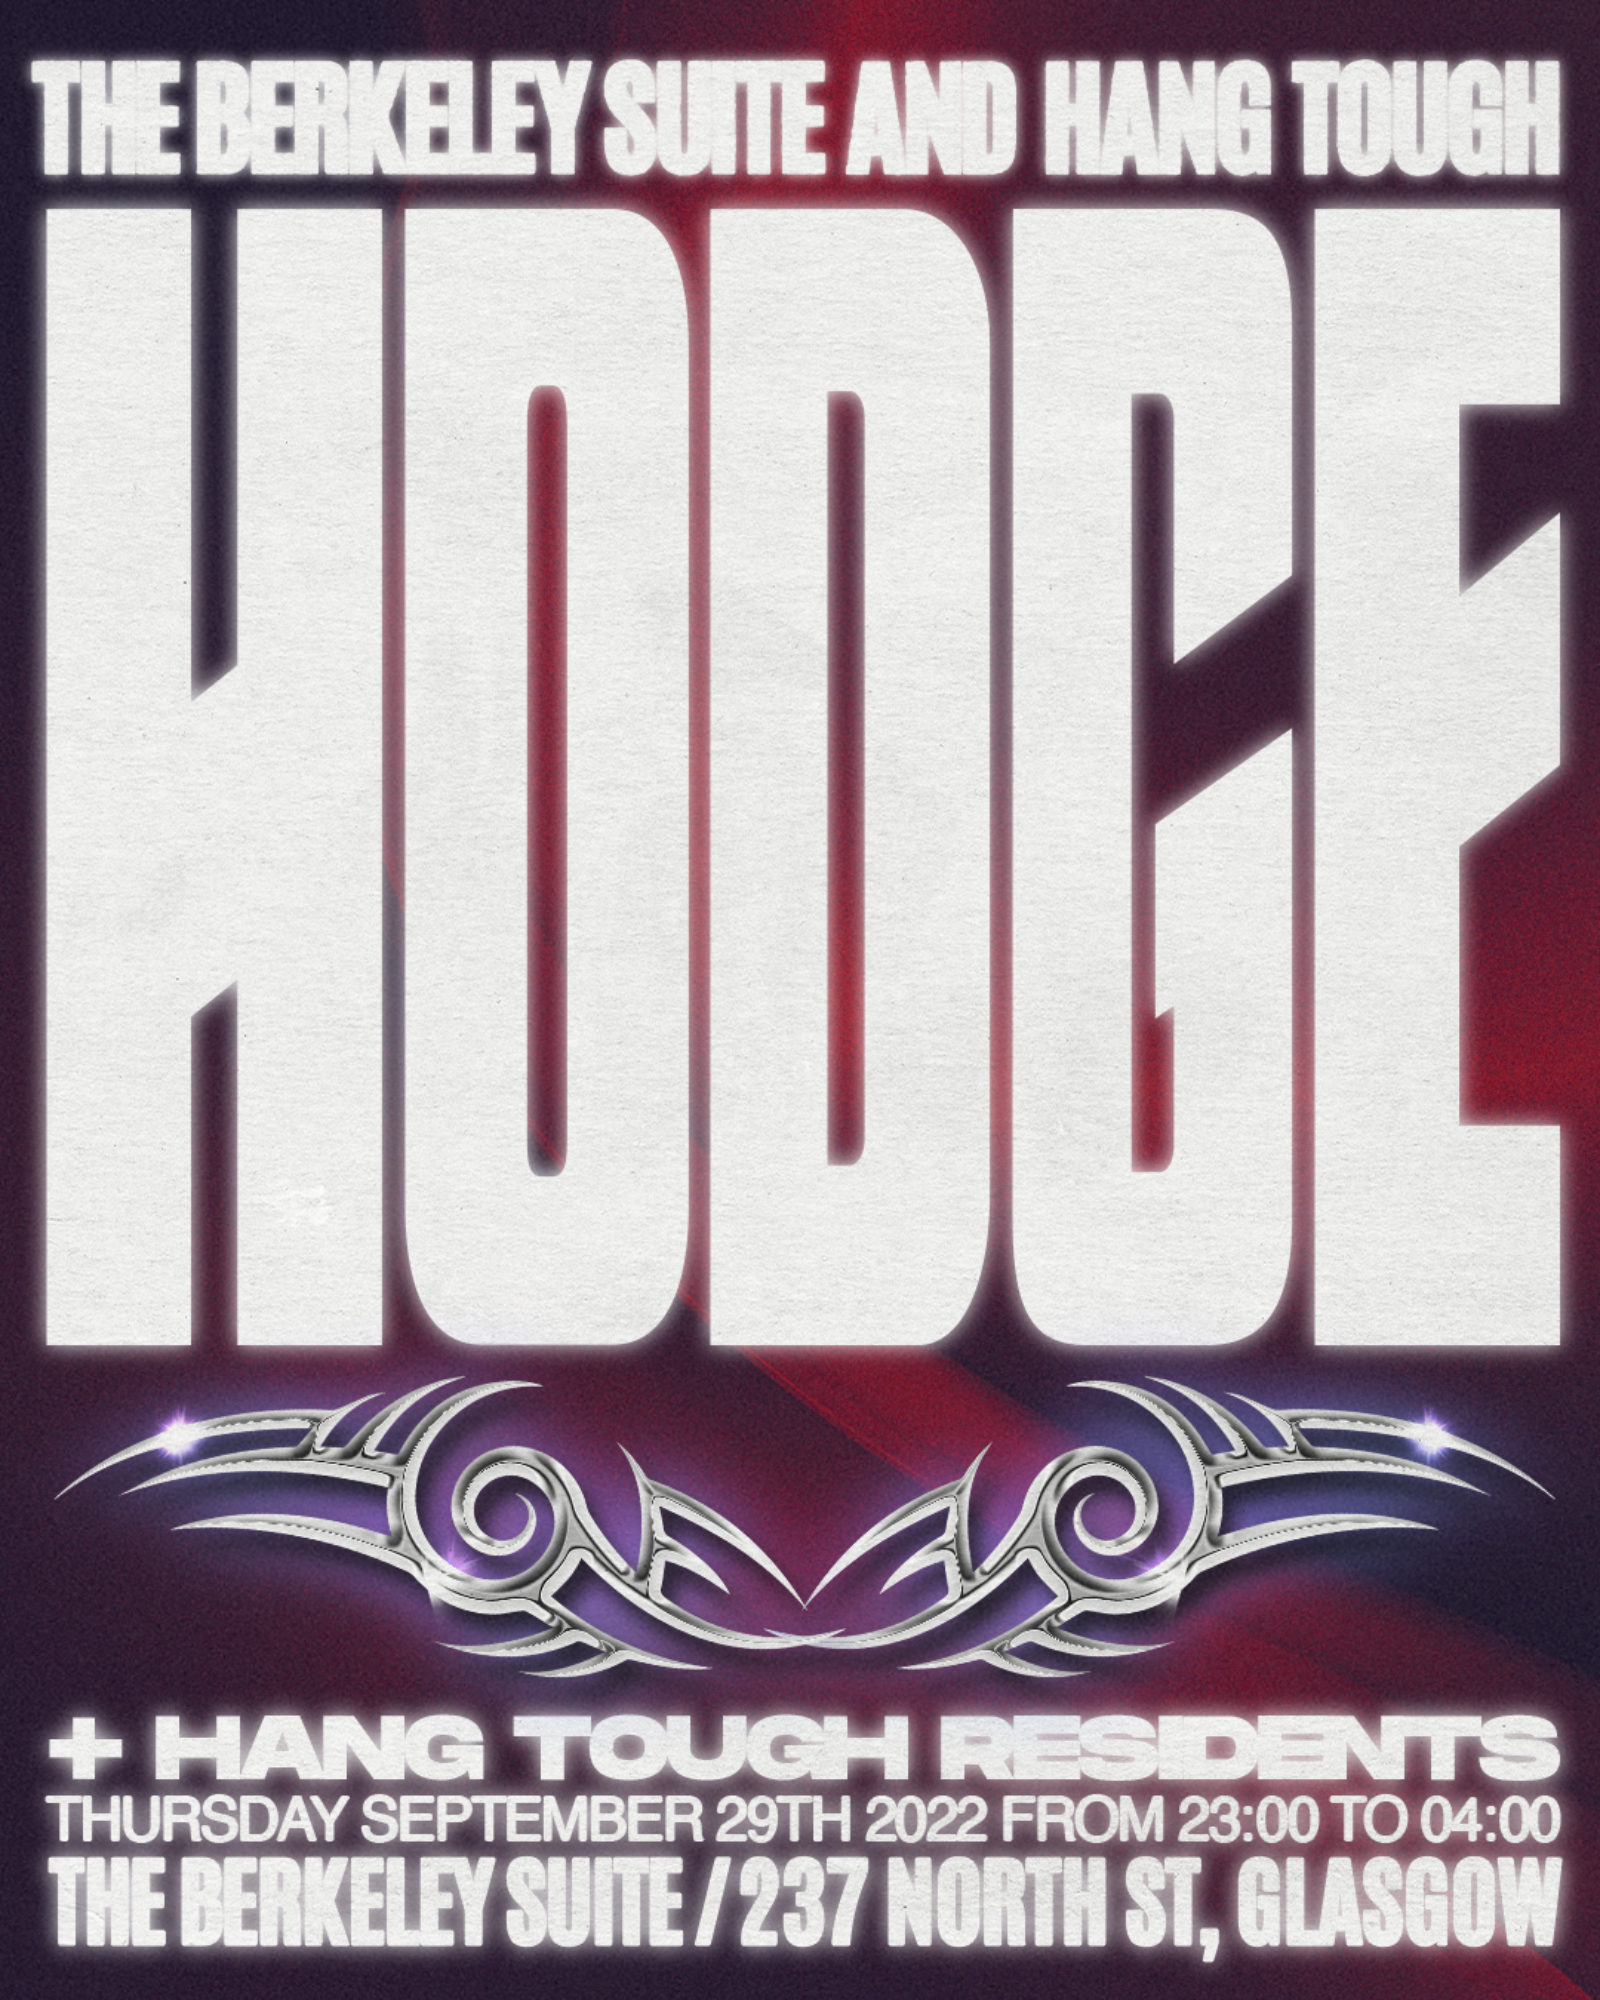 The Berkeley Suite and Hang Tough presents HODGE